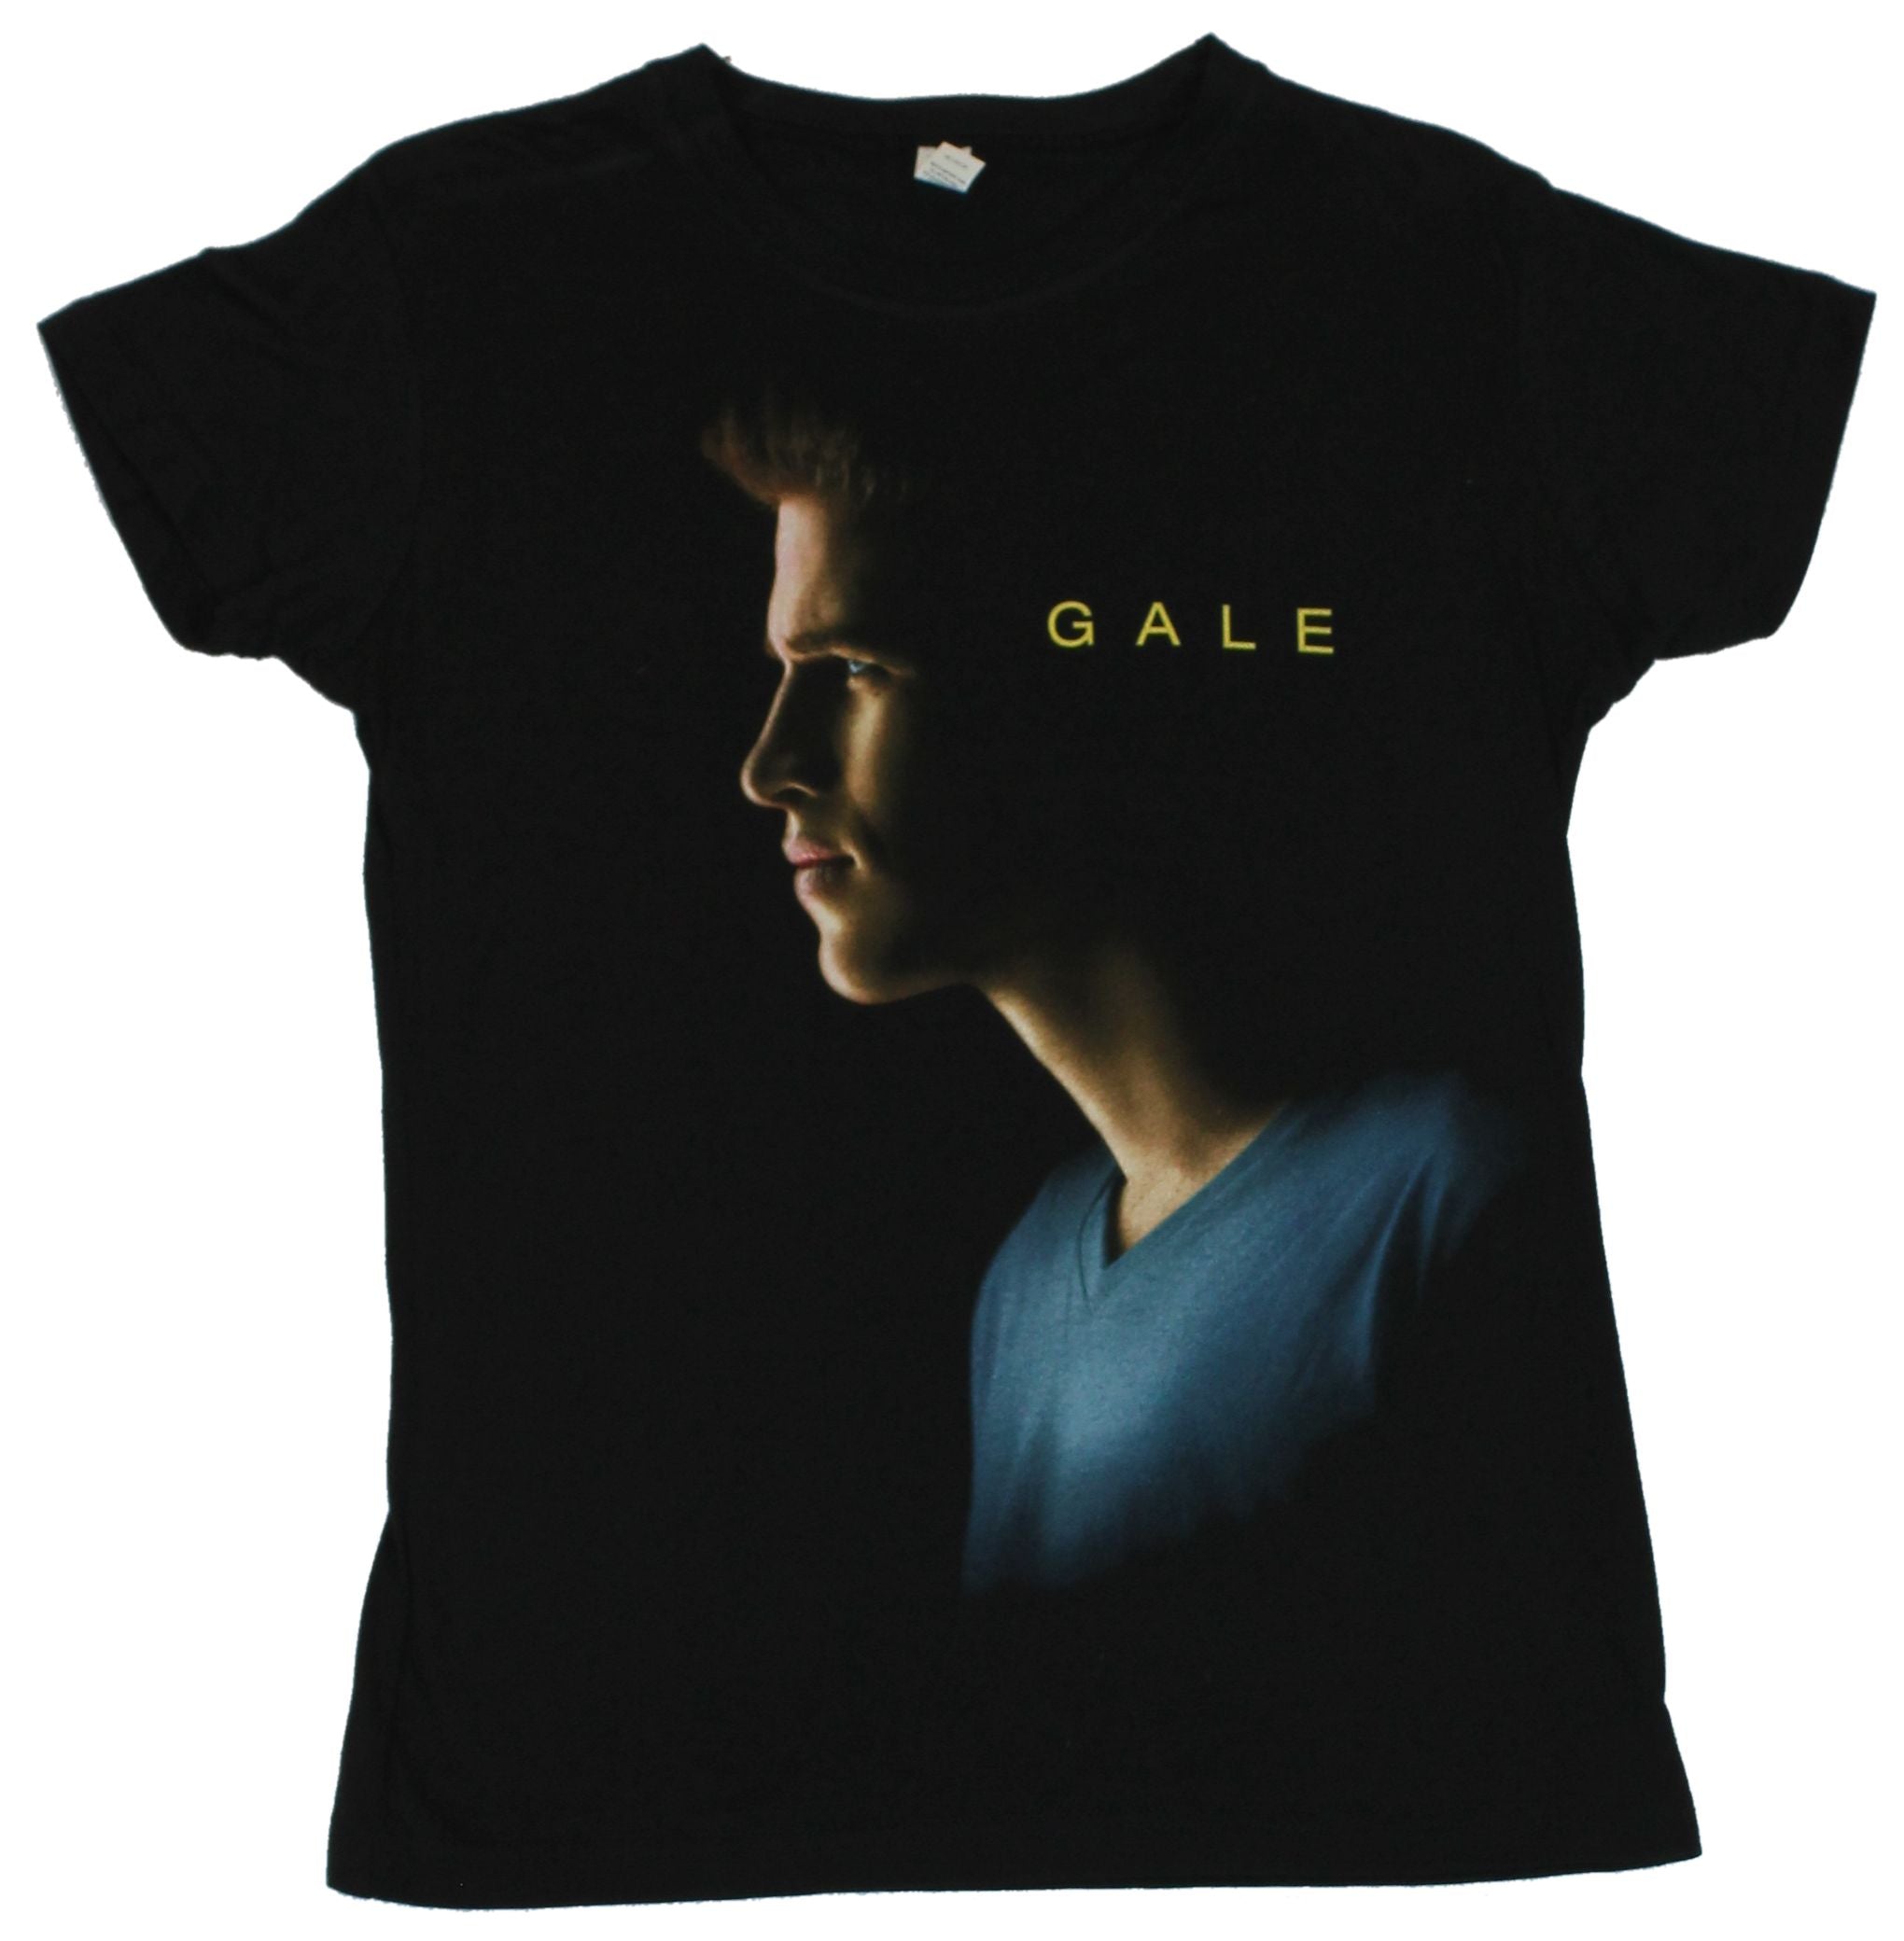 The Hunger Games Mens T-Shirt  - Giant Gale Profile Image on Black